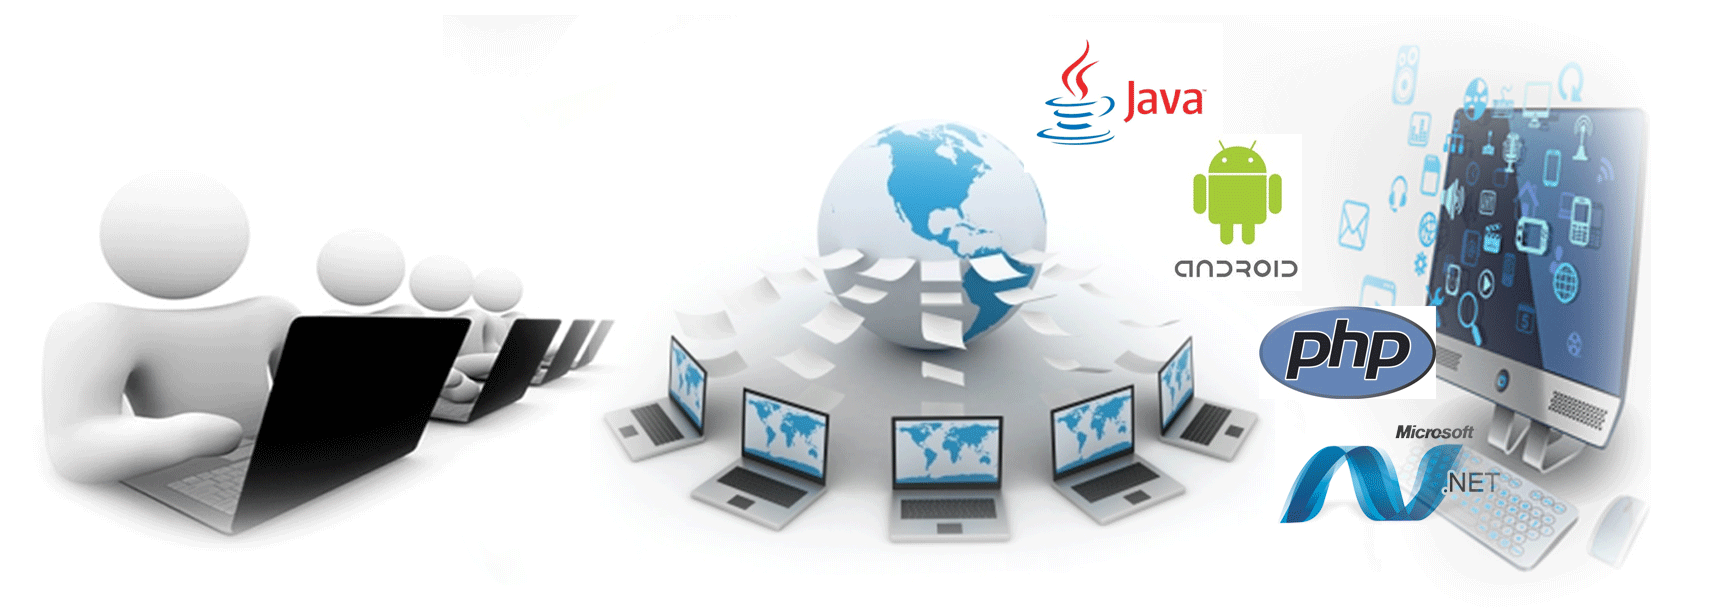 jazz-solution-is-the-best-software-company-in-thrissur,kerala,best-IT-company-in-thrissur,
			best-project-center-in-thrissur,project-center-in-thrissur,project-center-in-kerala,best-software-company-in-thrissur,best-software-company-in-kerala,
			IT-companies-in-thrissur,IT-centers-in-thrissur,software-companies-in-thrissur,project-centers-in-thrissur,
			best-IT-companies-in-thrissur,best-IT-centers-in-thrissur,best-software-companies-in-thrissur,best-project-centers-in-thrissur
			project-training-centers-in-thrissur,project-training-center-in-thrissur,project-training-centers-in-kerala,
			php-training-institutes-in-thrissur,best-php-training-institutes-in-thrissur,php-training-institutes-in-kerala,
			software-testing-courses-in-thrissur,software-testing-institutes-in-thrissur,software-testing-training,software-testing-jobs-in-thrissur,
			php-jobs-in-thrissur,software-testing-companies-in-india,live-project-training-in-php-mysql,project-training-in-php-mysql
			project-training-centers-in-thrissur,ASP.net-training,project-training-center-in-thrissur,project-training-centers-in-kerala,
			.net-training-institutes-in-thrissur,best-.net-training-institutes-in-thrissur,.net-training-institutes-in-kerala,
			software-companies-in-thrissur,software-testing-institutes-in-thrissur,software-testing-training,software-testing-jobs-in-thrissur,
			php-jobs-in-thrissur,software-testing-companies-in-india,live-project-training-in-php-mysql,project-training-in-php-mysqlpython-training,
			python-training-center-in-thrissur,python-training-centers-in-kerala,python-training-institutes-in-thrissur,
			best-python-training-institutes-in-thrissur,project-training-institutes-in-kerala,software-companies-in-thrissur,
			software-testing-institutes-in-thrissur,software-companies-in-thrissur,python-jobs-in-thrissur,python-jobs-in-thrissur,
			python-developing-companies-in-india,live-project-training-in-python,project-training-in-python,android-training,
			android-training-center-in-thrissur,android-training-centers-in-kerala,android-training-institutes-in-thrissur,
			best-android-training-institutes-in-thrissur,android-app-development-in-kerala,android-app-development-companies-in-thrissur,
			android-application-developing-companies-in-thrissur,app-deveveloping-companies-in-thrissur,android-developer-jobs-in-thrissur,
			python-jobs-in-thrissur,python-developing-companies-in-india ,live-project-training-in-python,project-training-in-pythonjava-training,
			java-training-center-in-thrissur,java-training-centers-in-kerala,java-training-institutes-in-thrissur,
			best-java-training-institutes-in-thrissur,java-app-development-in-kerala,java-app-development-companies-in-thrissur,
			java-application-developing-companies-in-thrissur,app-deveveloping-companies-in-thrissur,jobs-for-java-developers,
			java-developer-jobs-in-thrissur,java-app-developing-companies-in-india,live-project-training-in-core-java,project-training-in-java
			ios-training-center-in-thrissur,ios-training-centers-in-kerala,ios-training-institutes-in-thrissur,best-ios-training-institutes-in-thrissur,
			ios-app-development-in-kerala,ios-app-development-companies-in-thrissur,ios-application-developing-companies-in-thrissur,
			app-deveveloping-companies-in-thrissur,jobs-for-ios-developers,ios-developer-jobs-in-thrissur,ios-app-developing-companies-in-india,
			training-in-ios-app-development